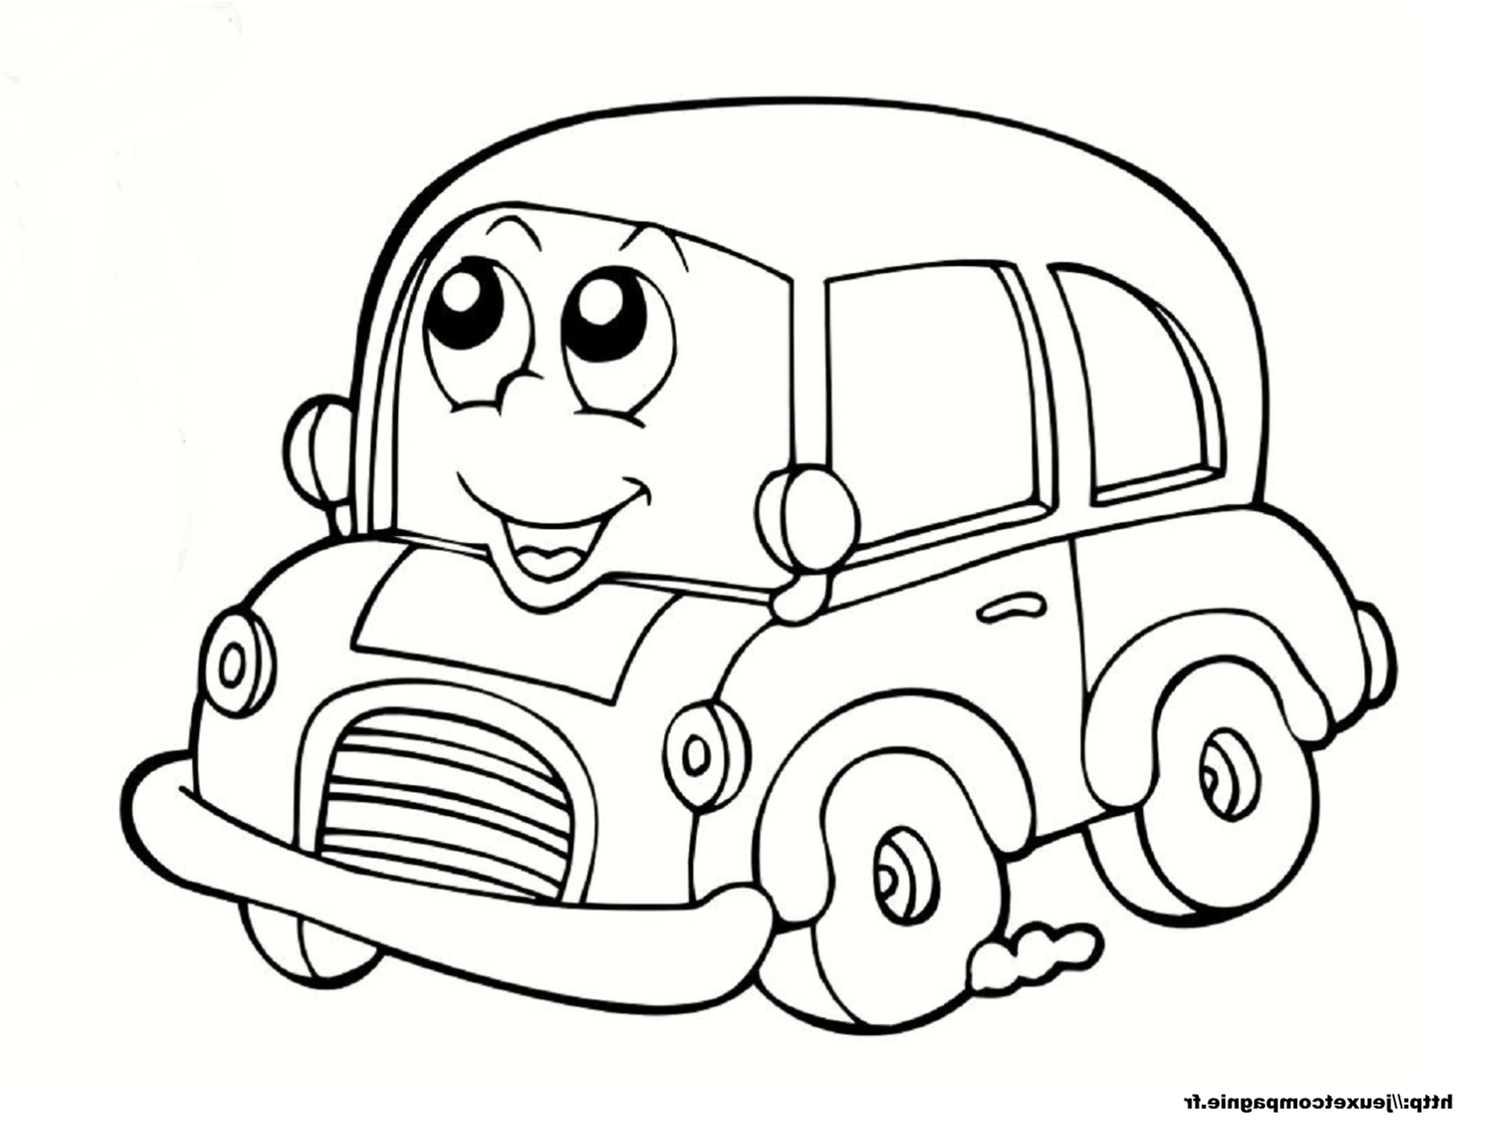 image=voitures coloriage voiture 4 1